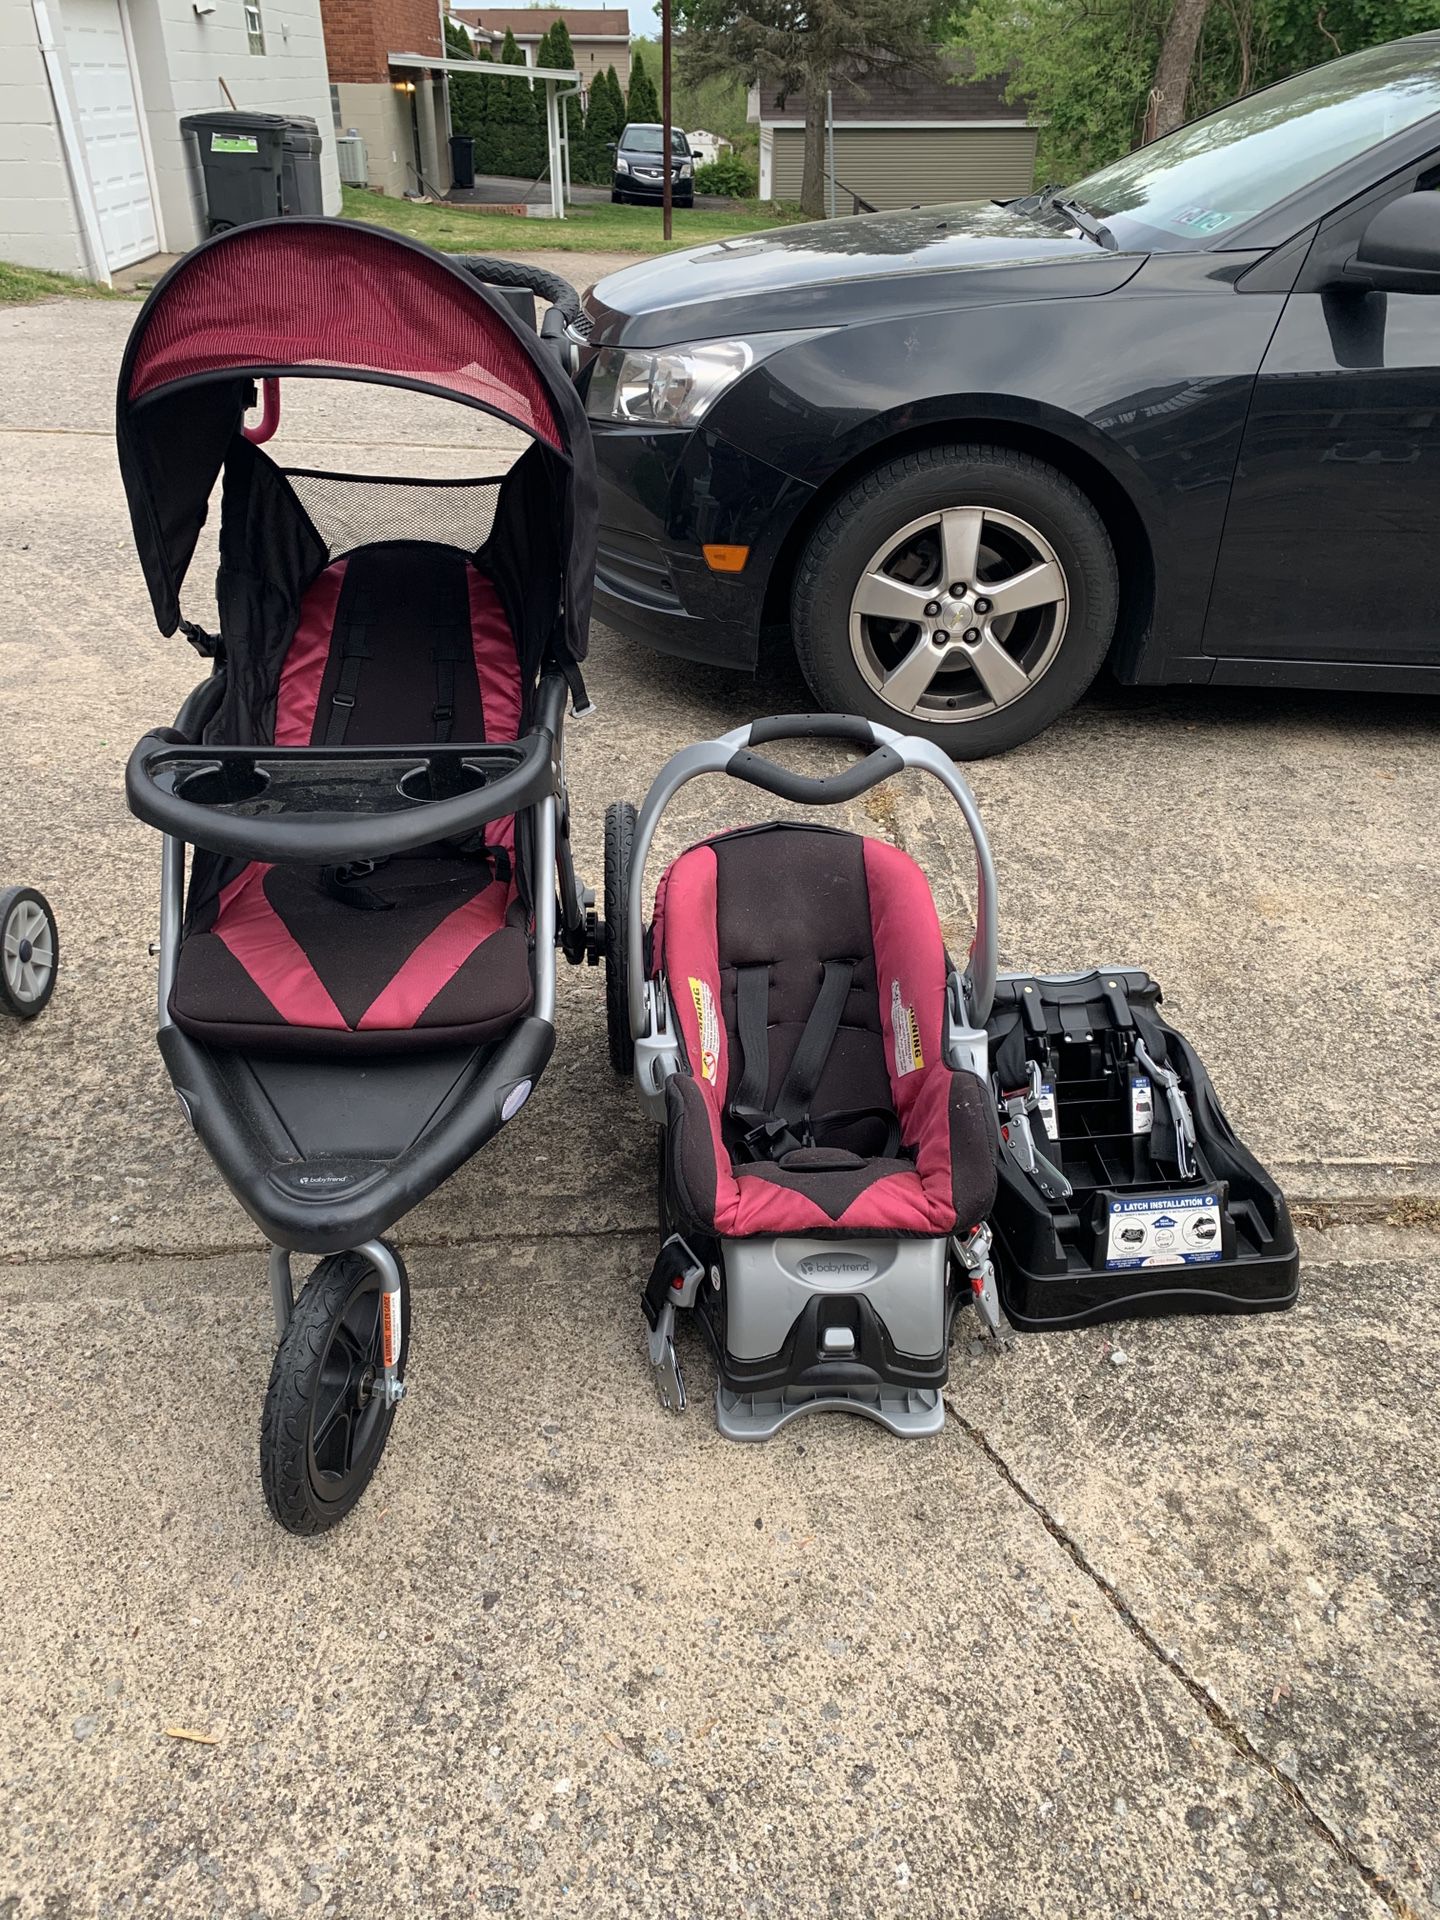 Strollers, car seats and bases